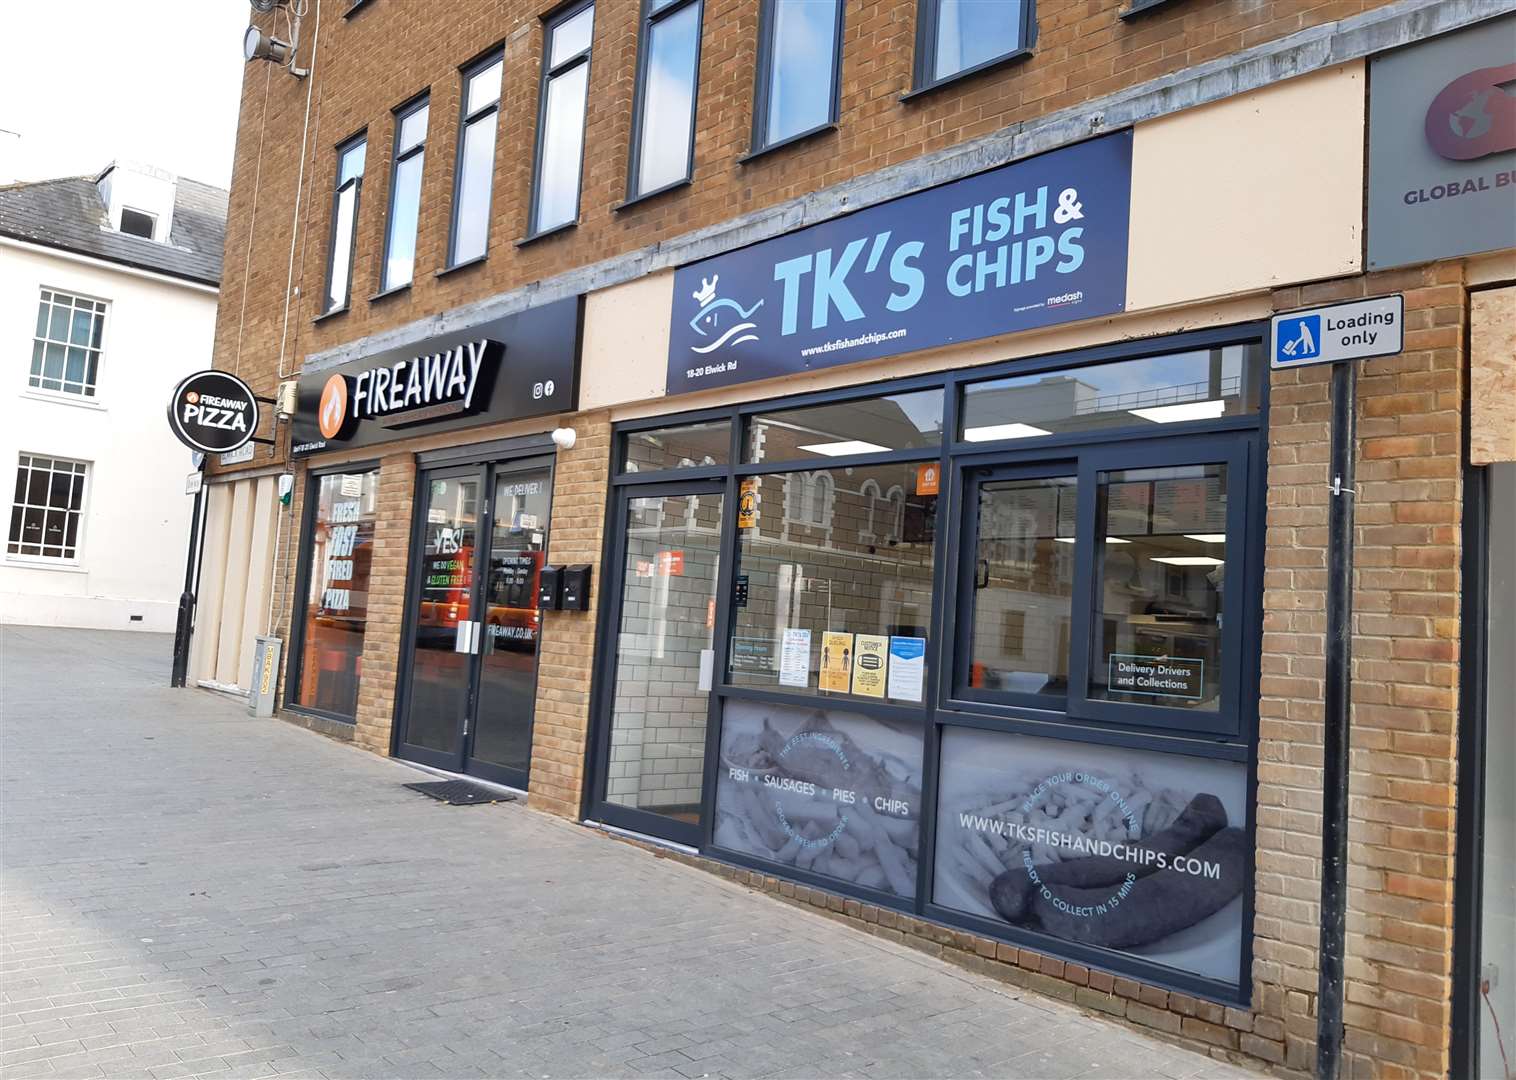 Two new takeaways - Fireaway Pizza and TK's Fish and Chips - have opened in Bank Street